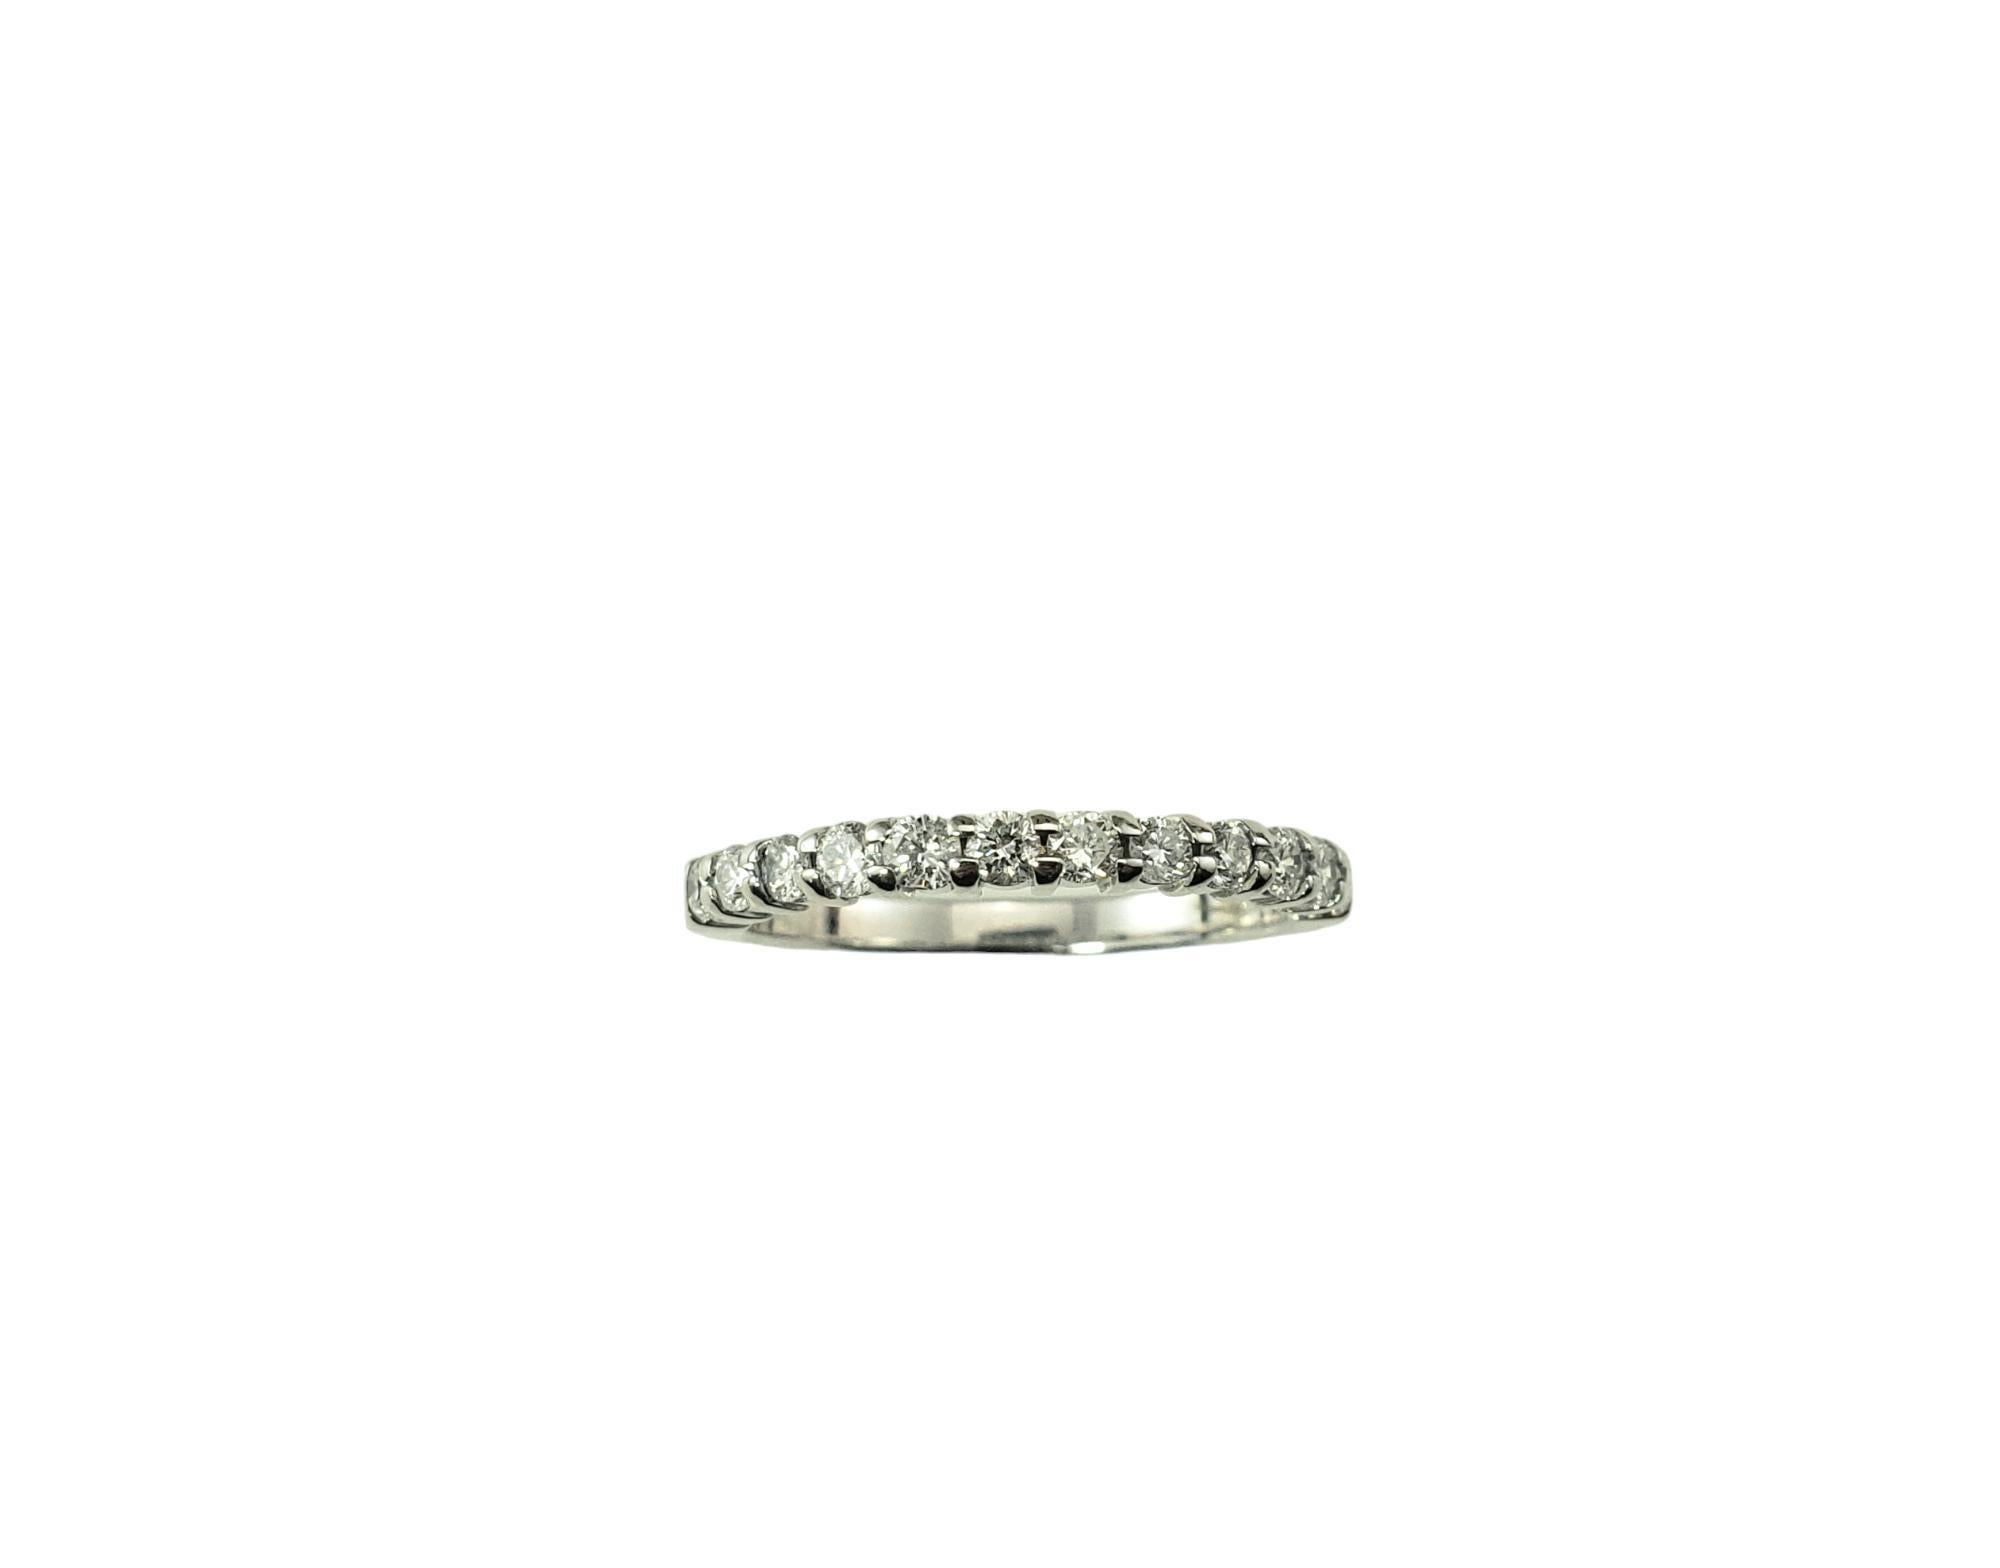 14 Karat White Gold and Diamond Wedding Band Ring Size 7

This sparkling band features 12 round brilliant cut diamonds* set in classic 14K white gold.  

*Chip noted to one diamond not visible to naked eye.

Approximate total diamond weight:  0.36